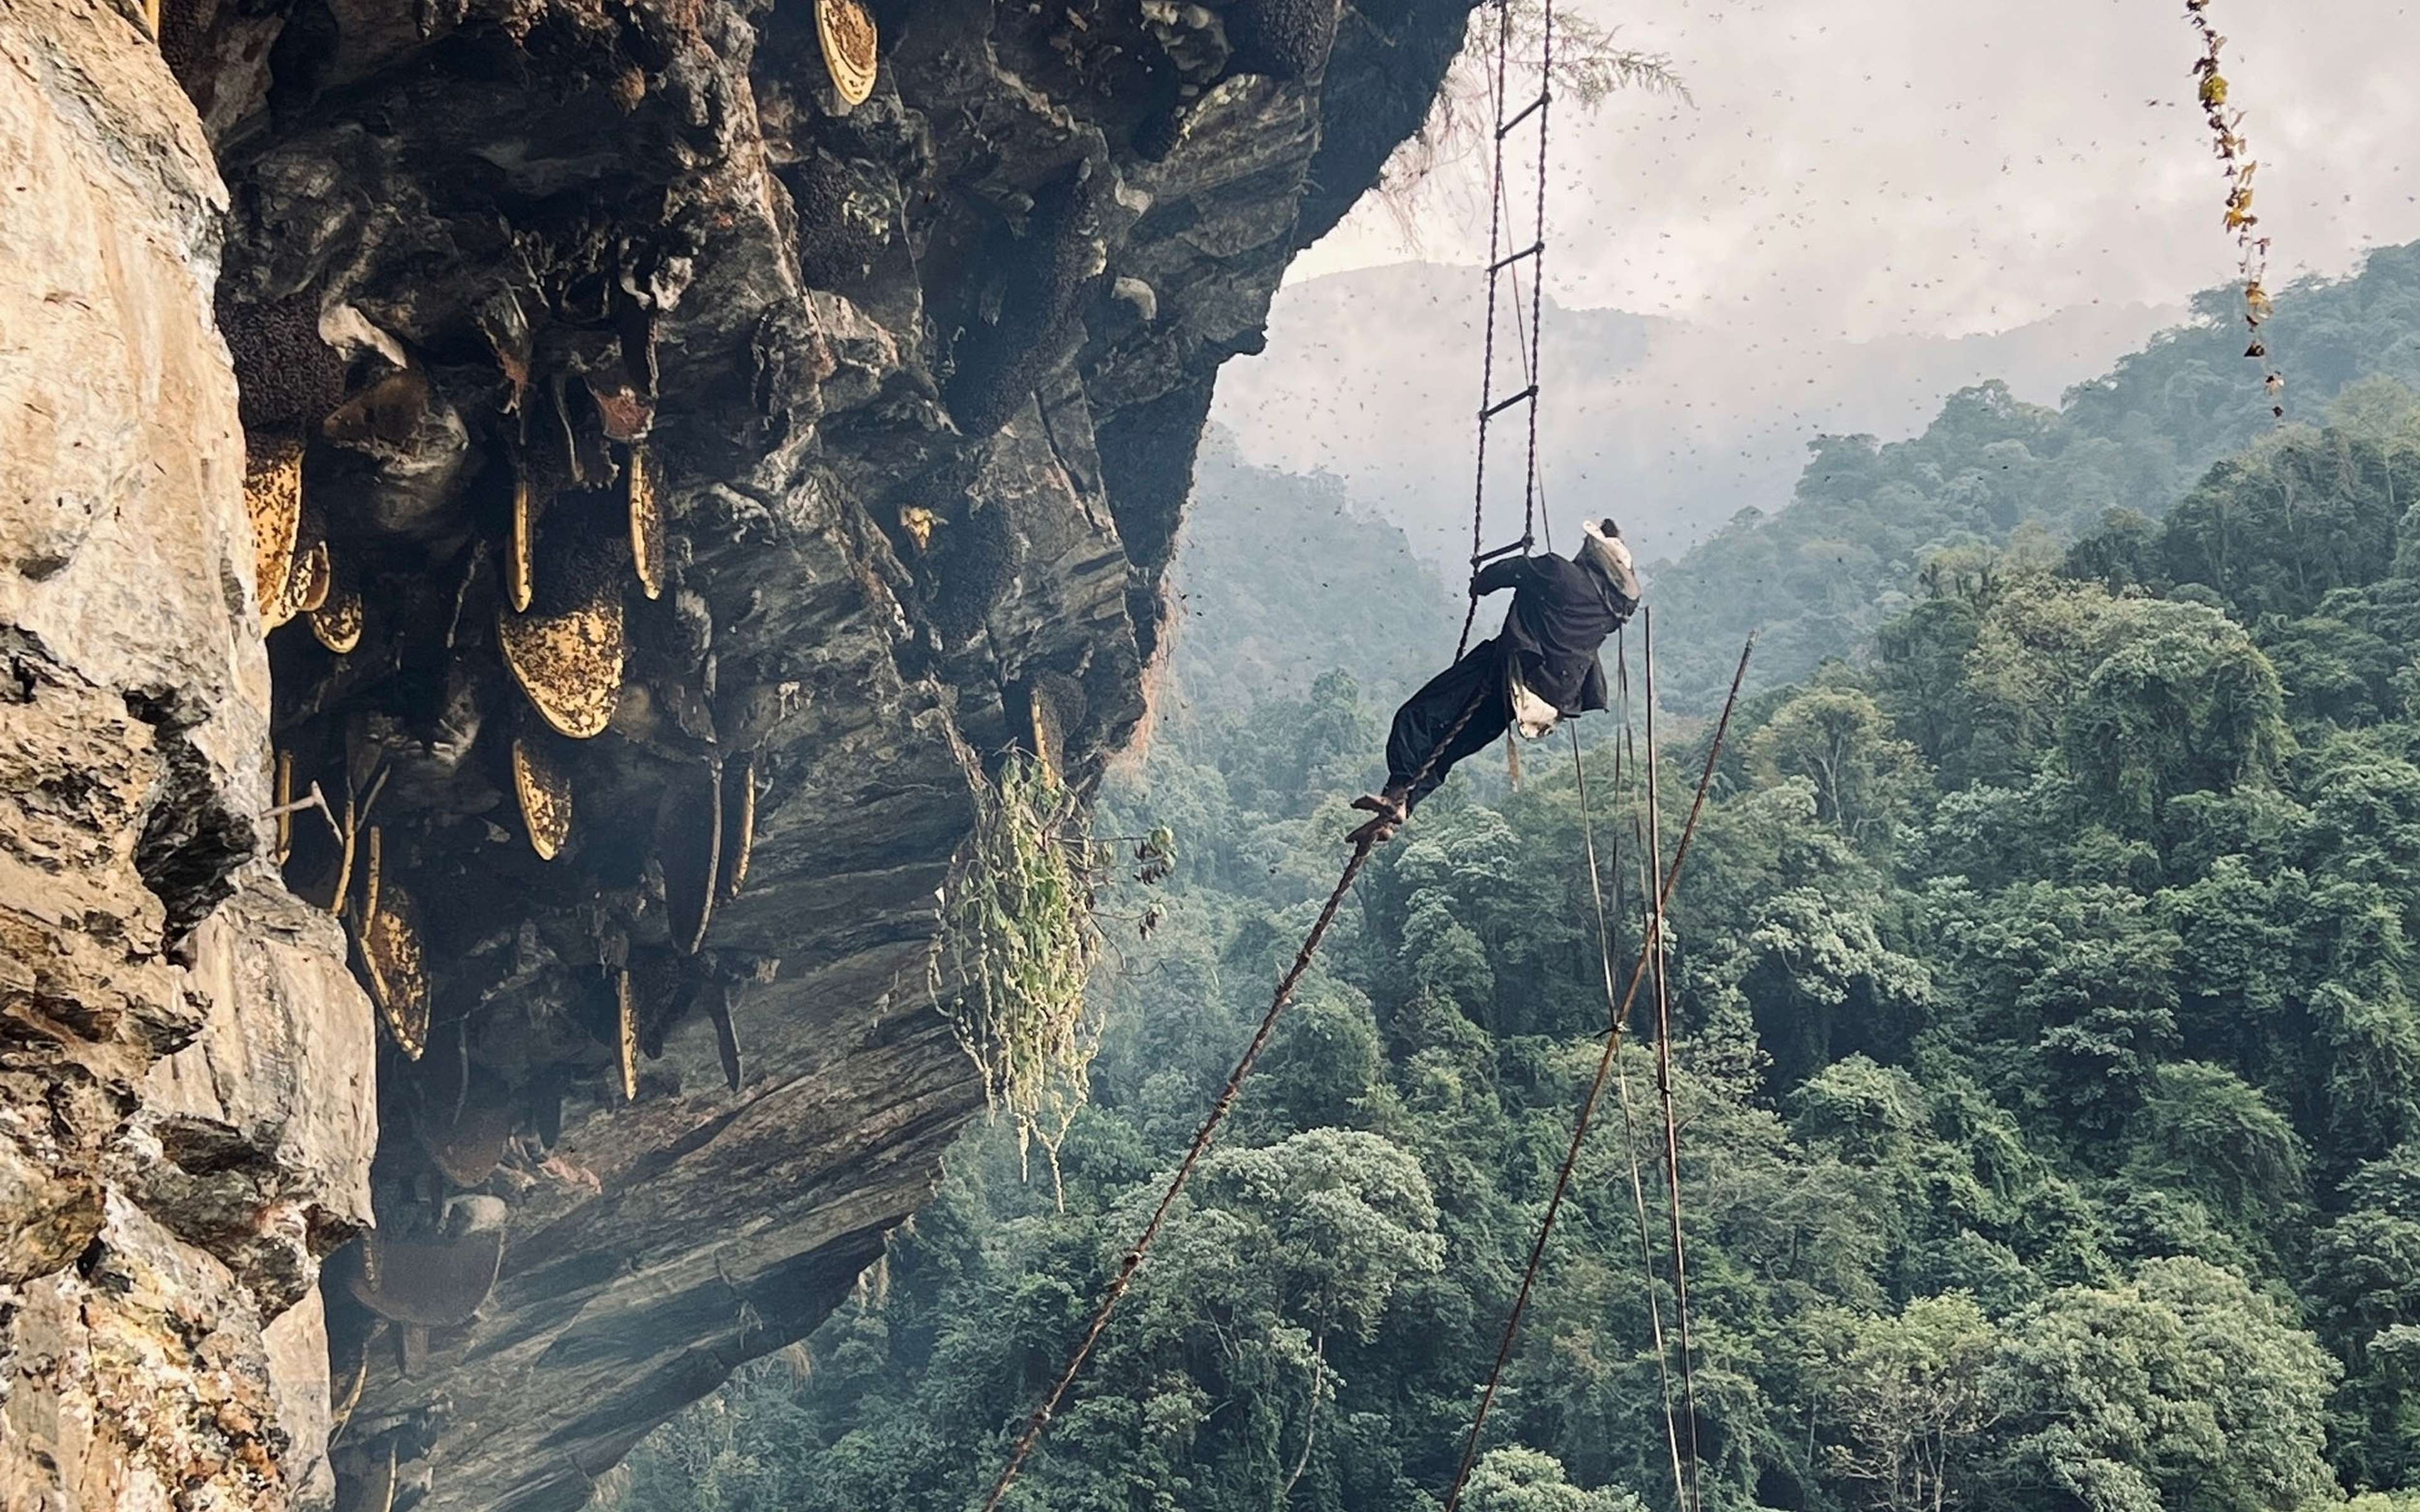 A honey hunter hanging off a cliff on a rope ladder.